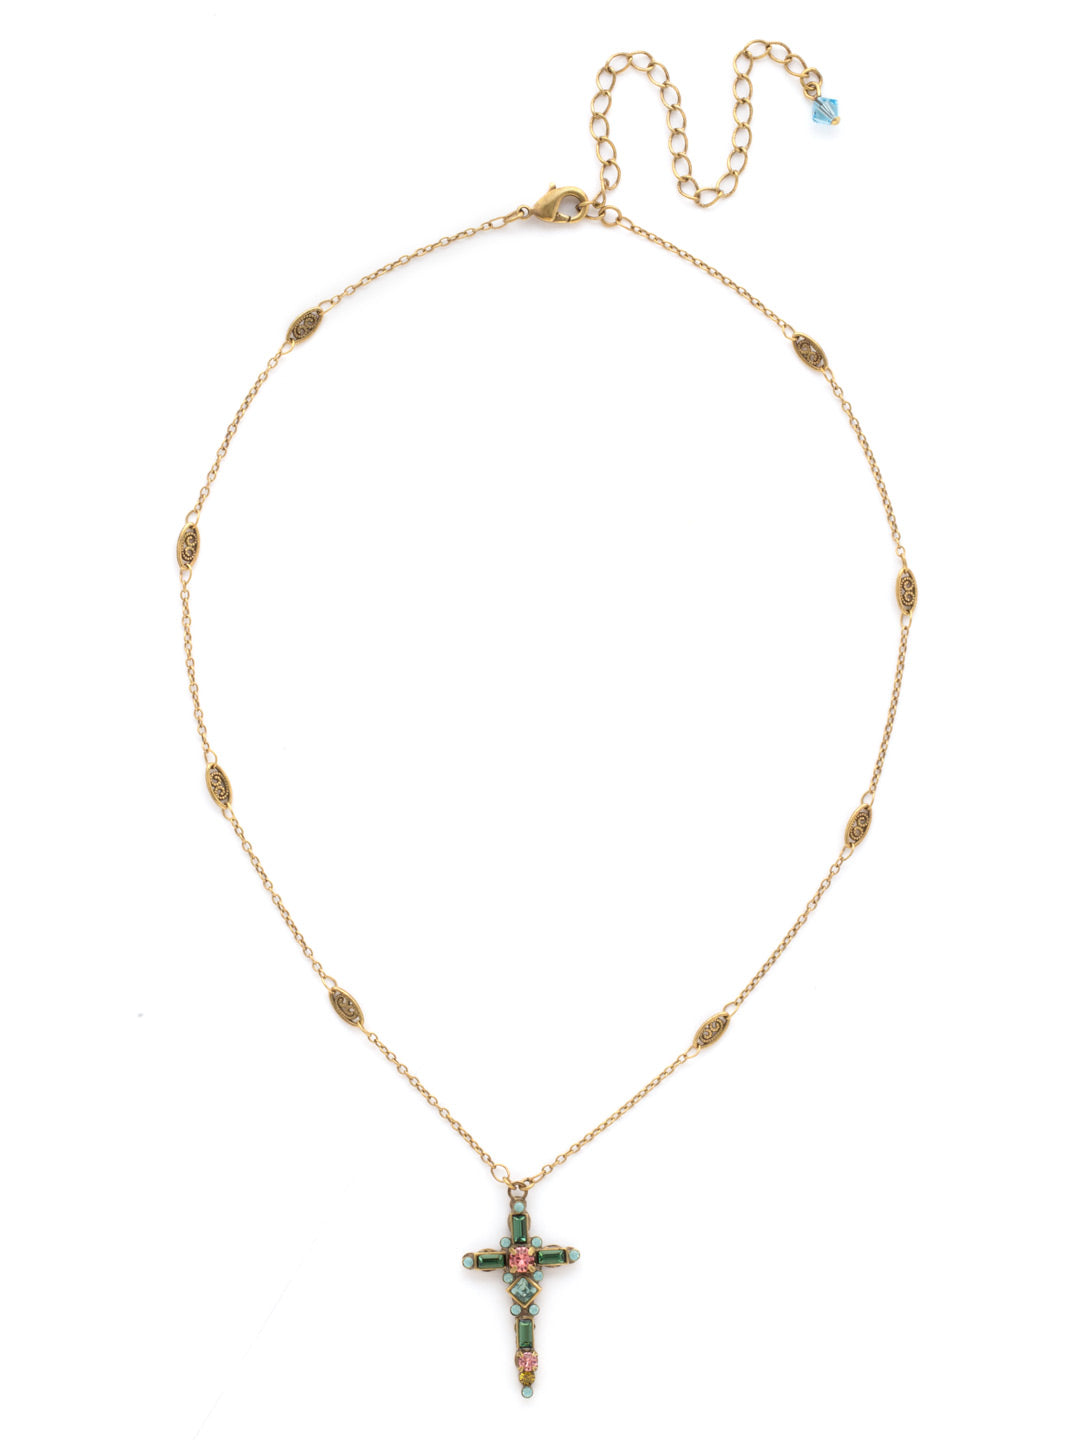 Delicate Cross Pendant Necklace - NDK48AGPOP - <p>A truly divine pendant. This delicate cross pendant features multi-cut crystals in an antique inspired setting. From Sorrelli's Gem Pop collection in our Antique Gold-tone finish.</p>